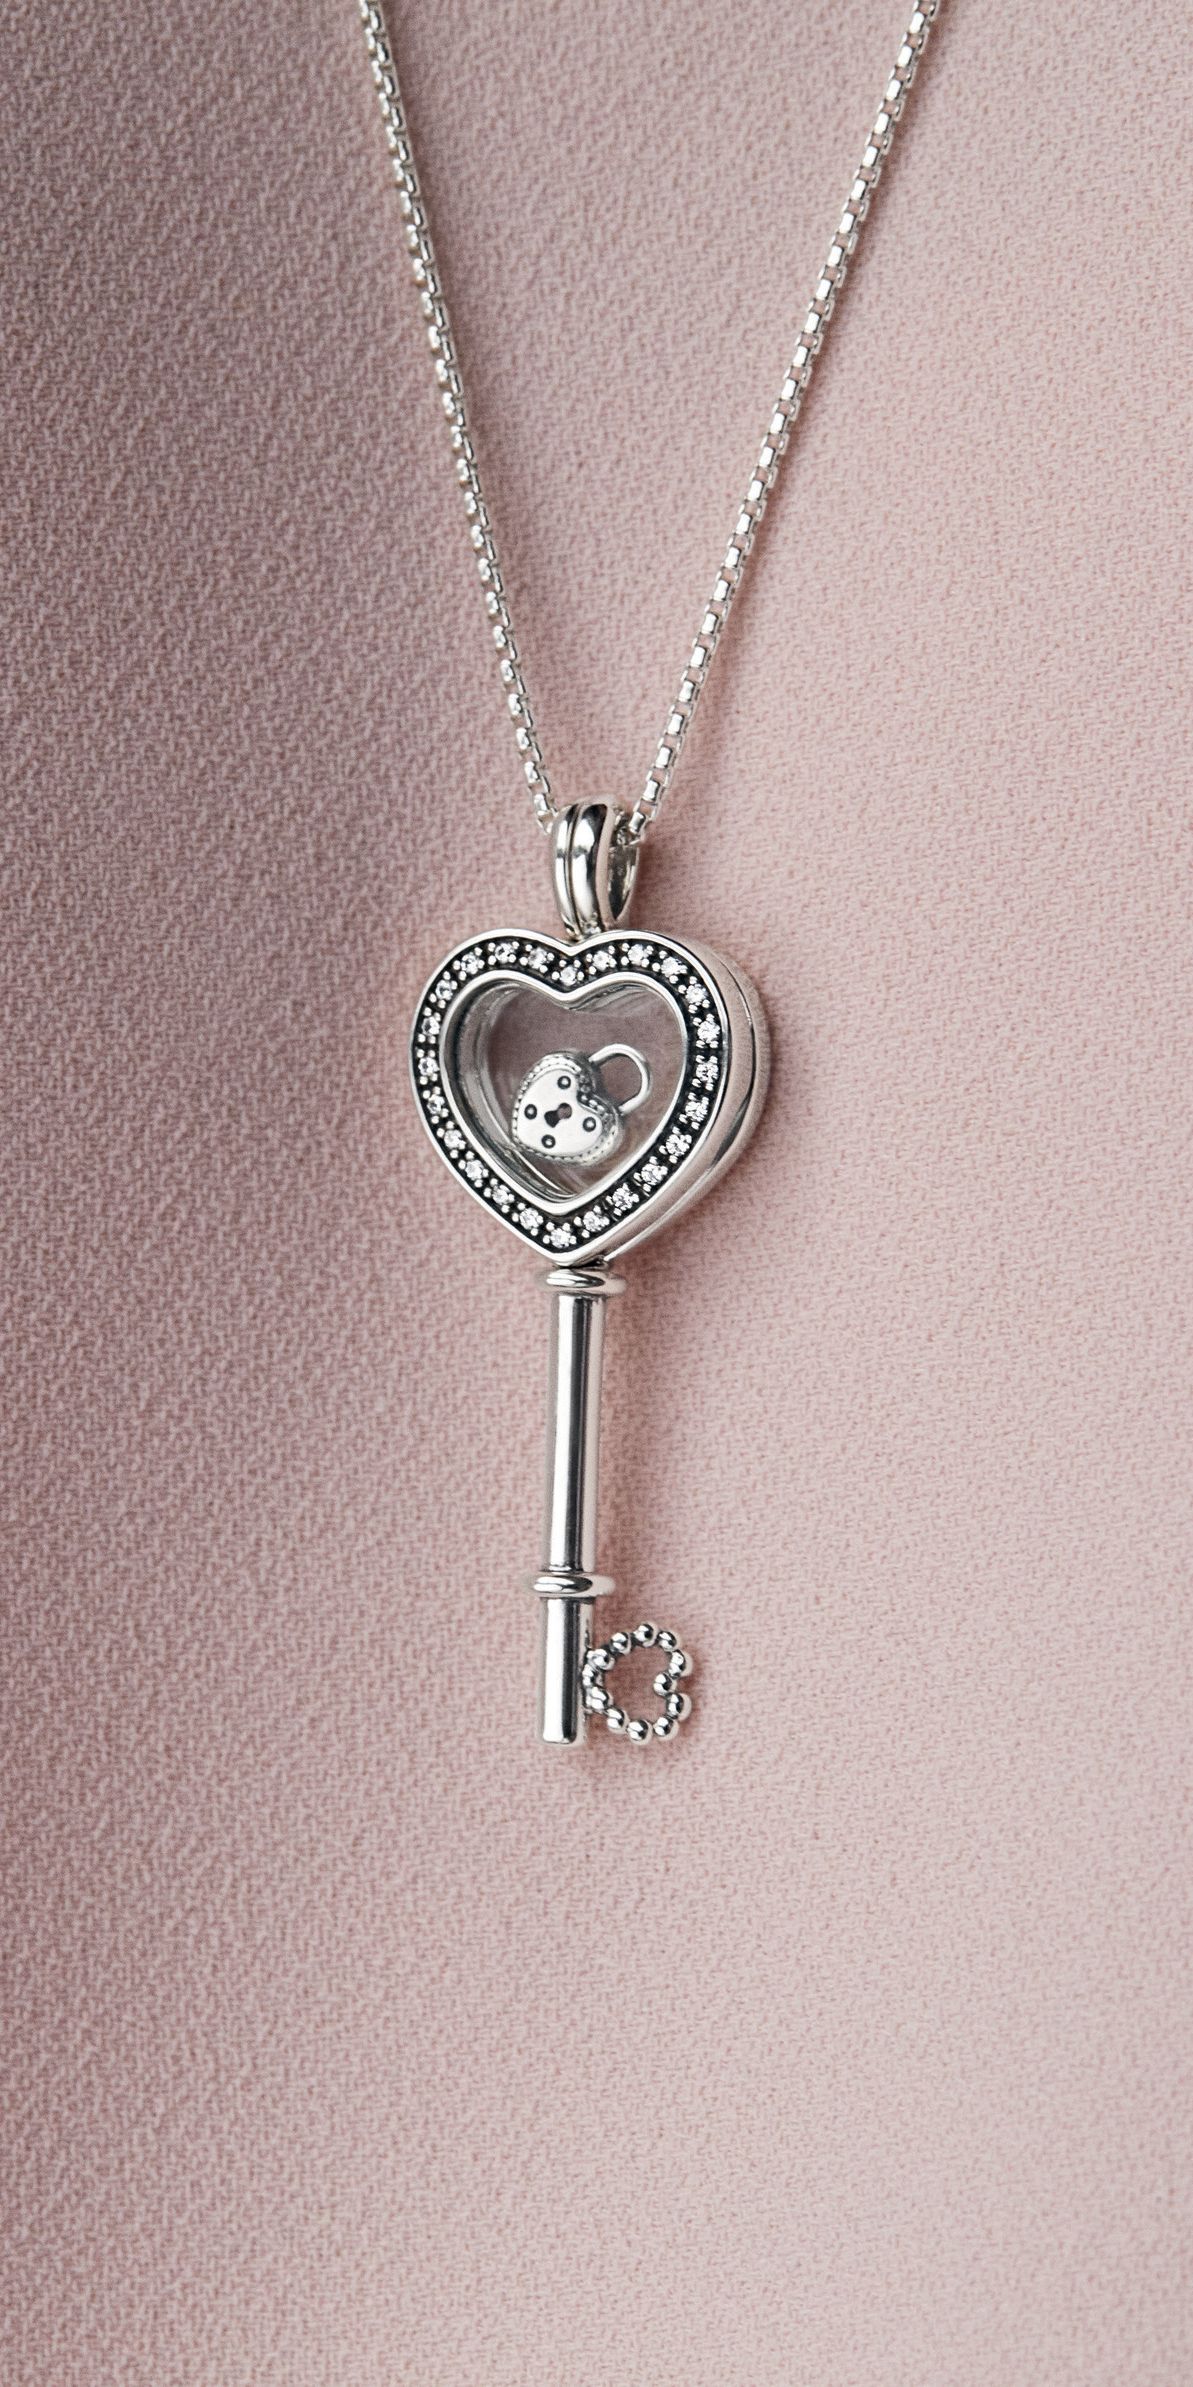 Valentine's Day Jewellery | Pandora In 2019 | Pandora Locket For Most Current Baby Blue Enamel Blue Heart Petite Locket Charm Necklaces (View 7 of 25)